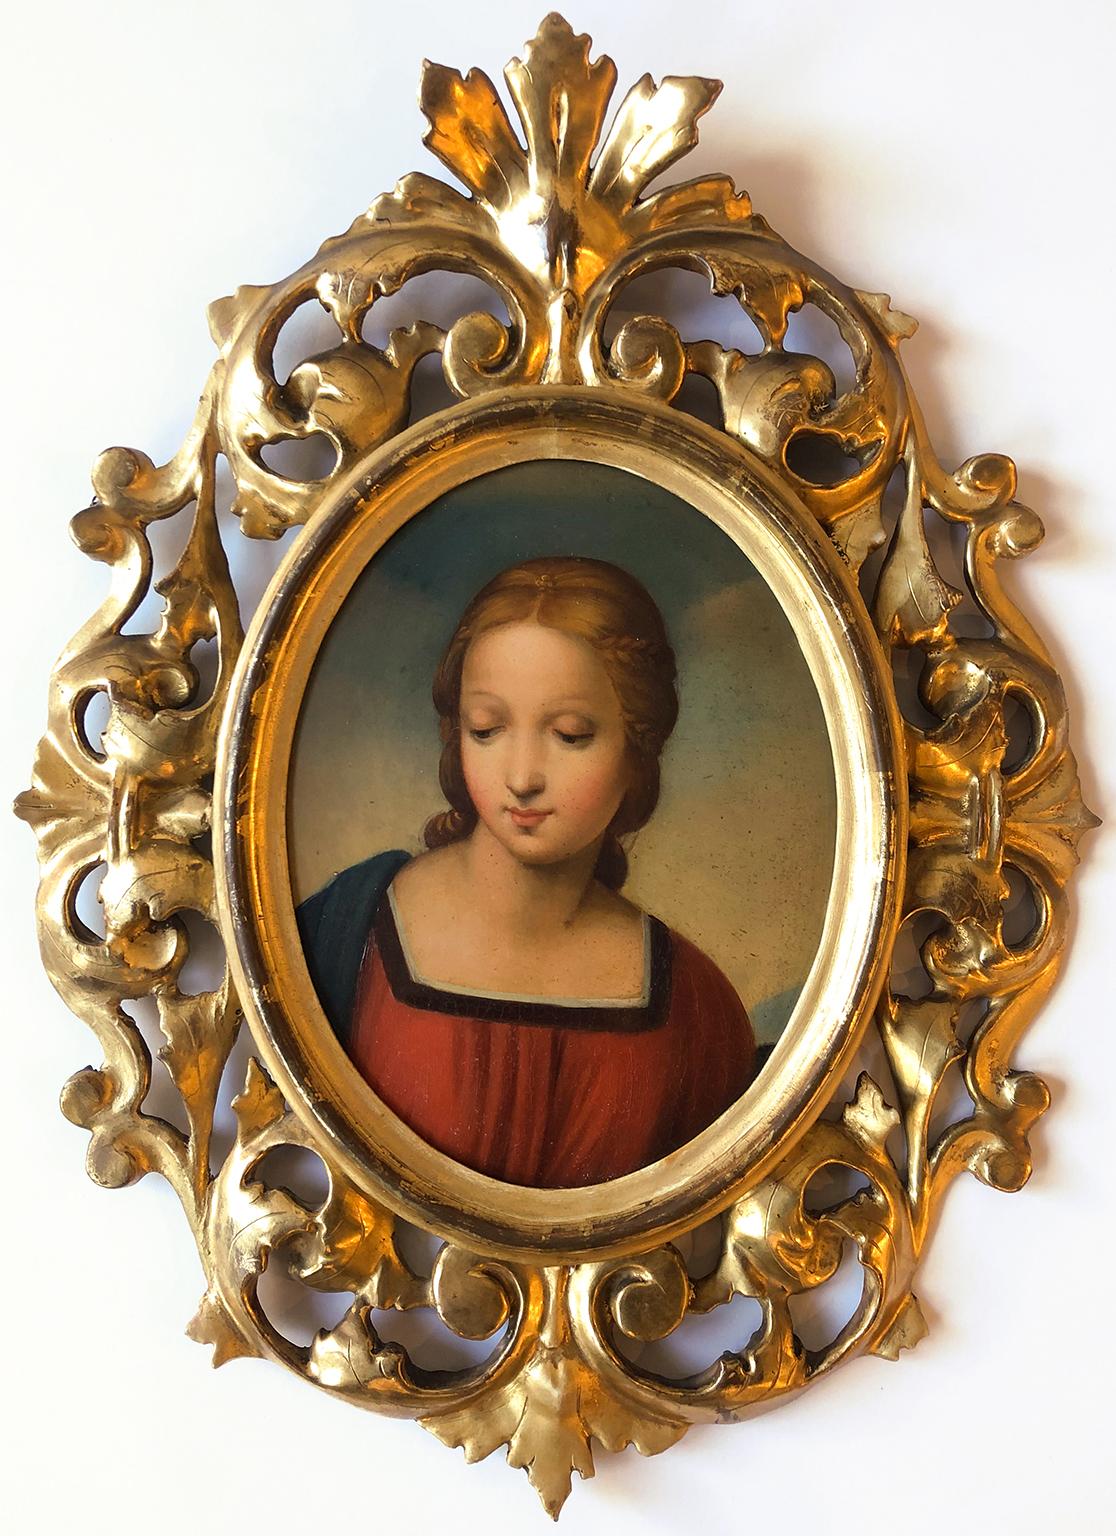 Unknown Portrait Painting - Madonna of the Goldfinch - After Raphael (Italian 1483 - 1520)